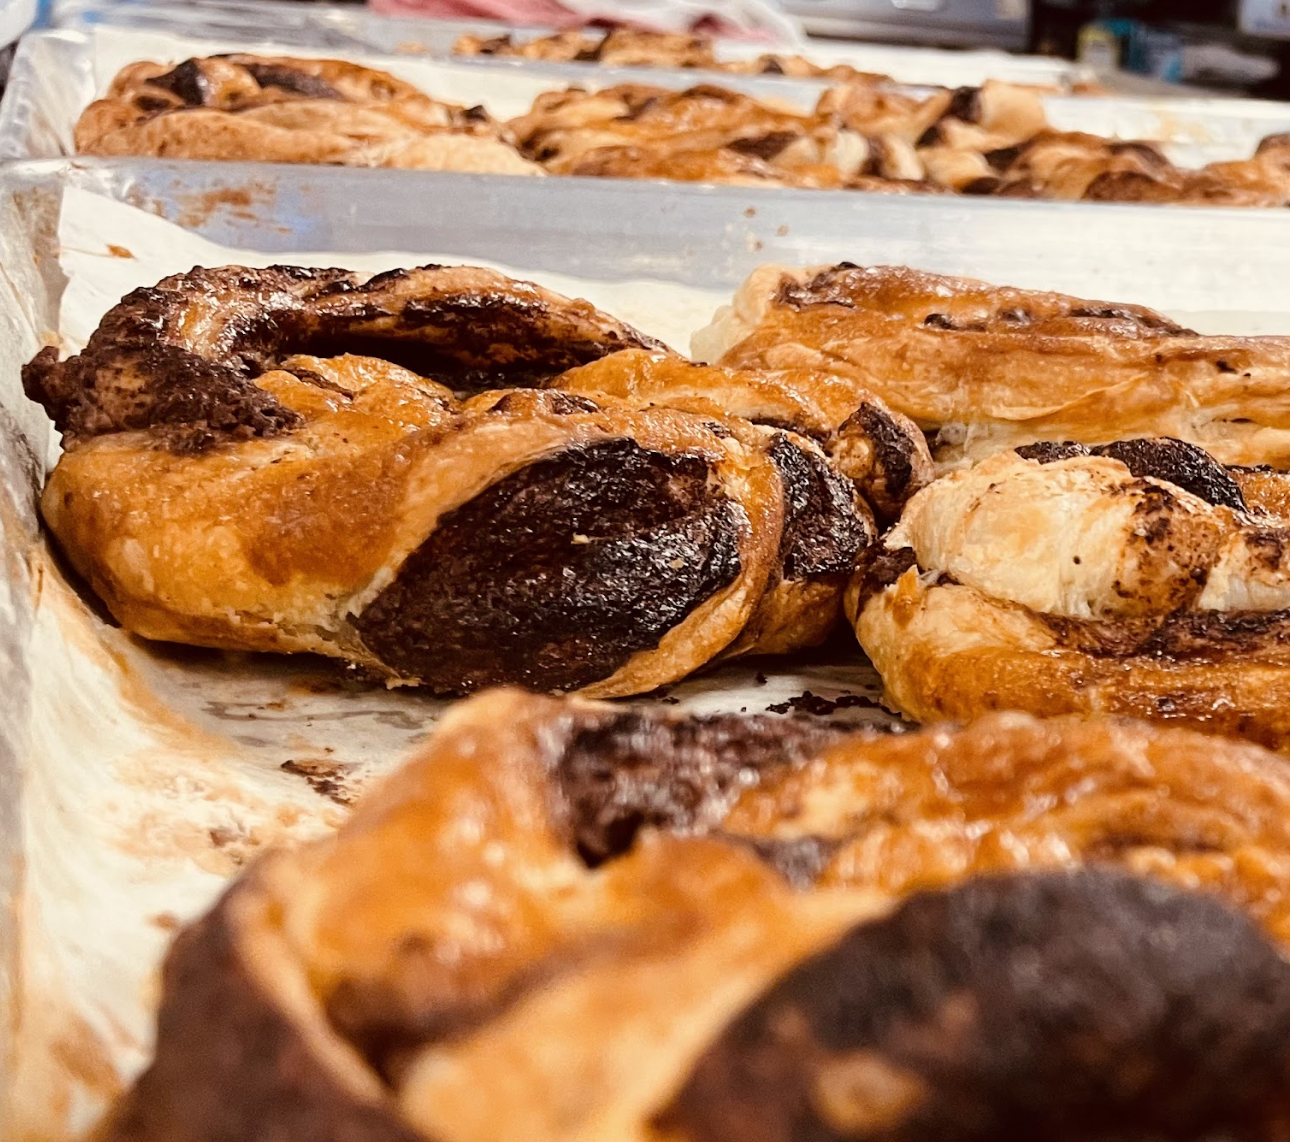 Indulge in the decadent delight of our Nutella Swirl, where rich, creamy Nutella is generously swirled into a soft, moist cake (or pastry). Each bite offers a heavenly blend of chocolate-hazelnut goodness perfectly balanced with a light, buttery texture. 